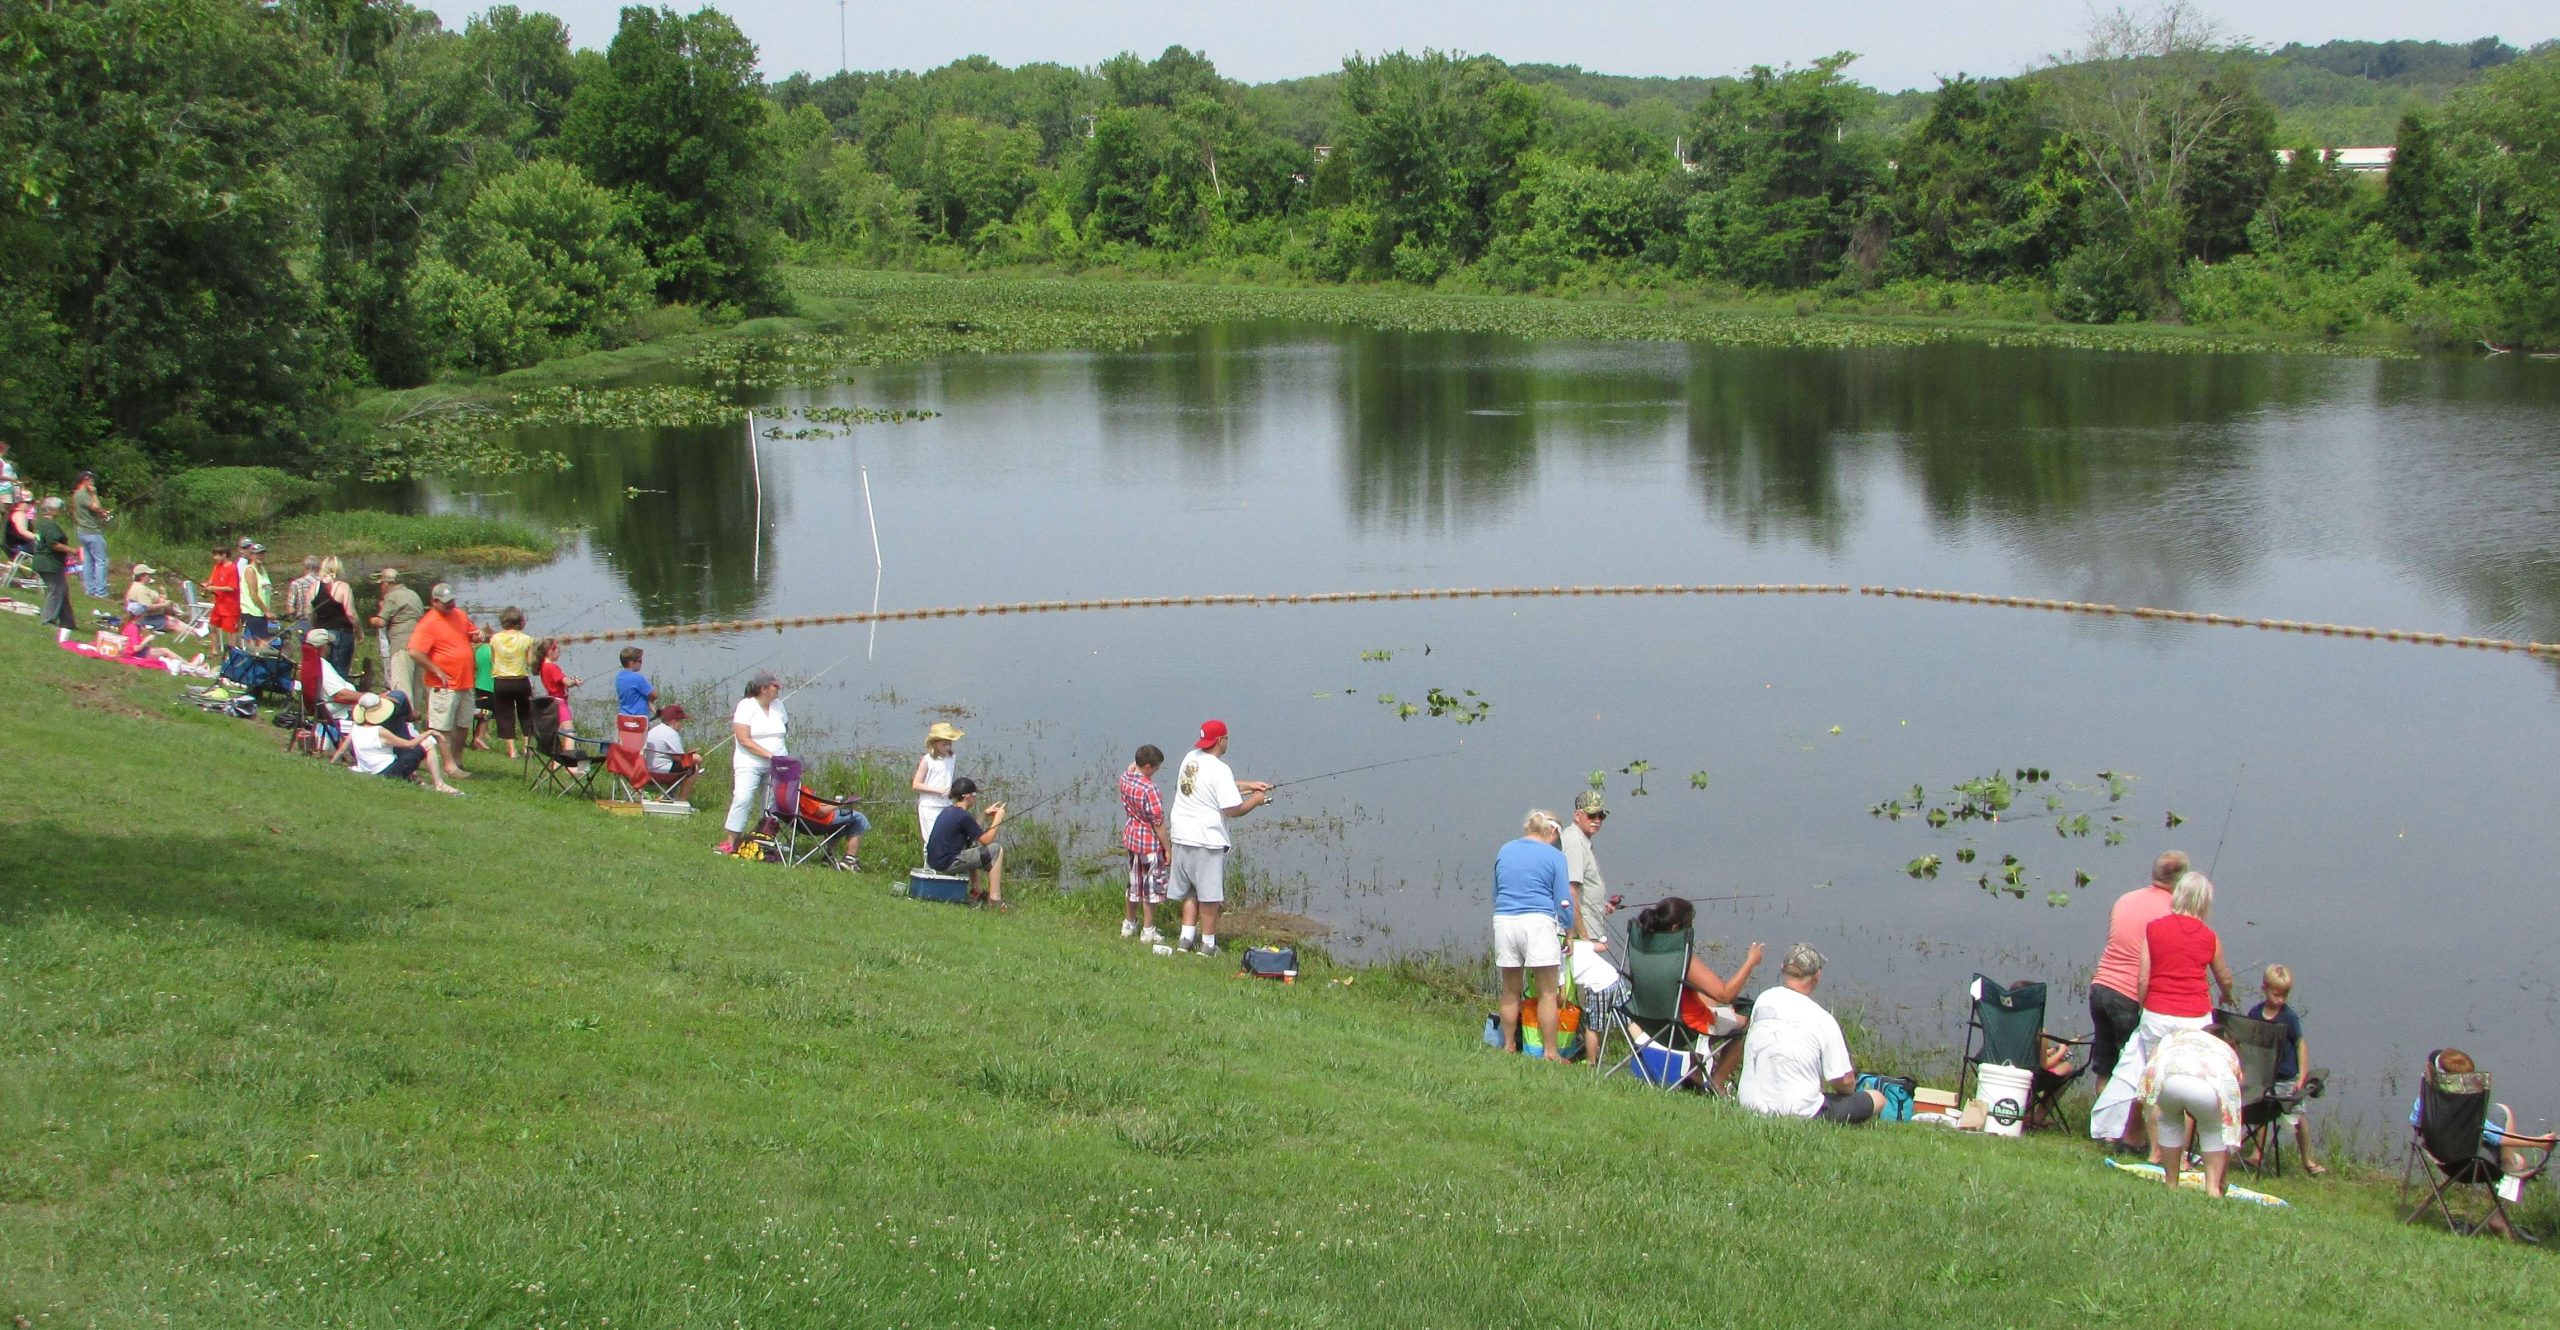 A number of young anglers fished a pond in Paris Landing State Park looking for trophy fish of their own.